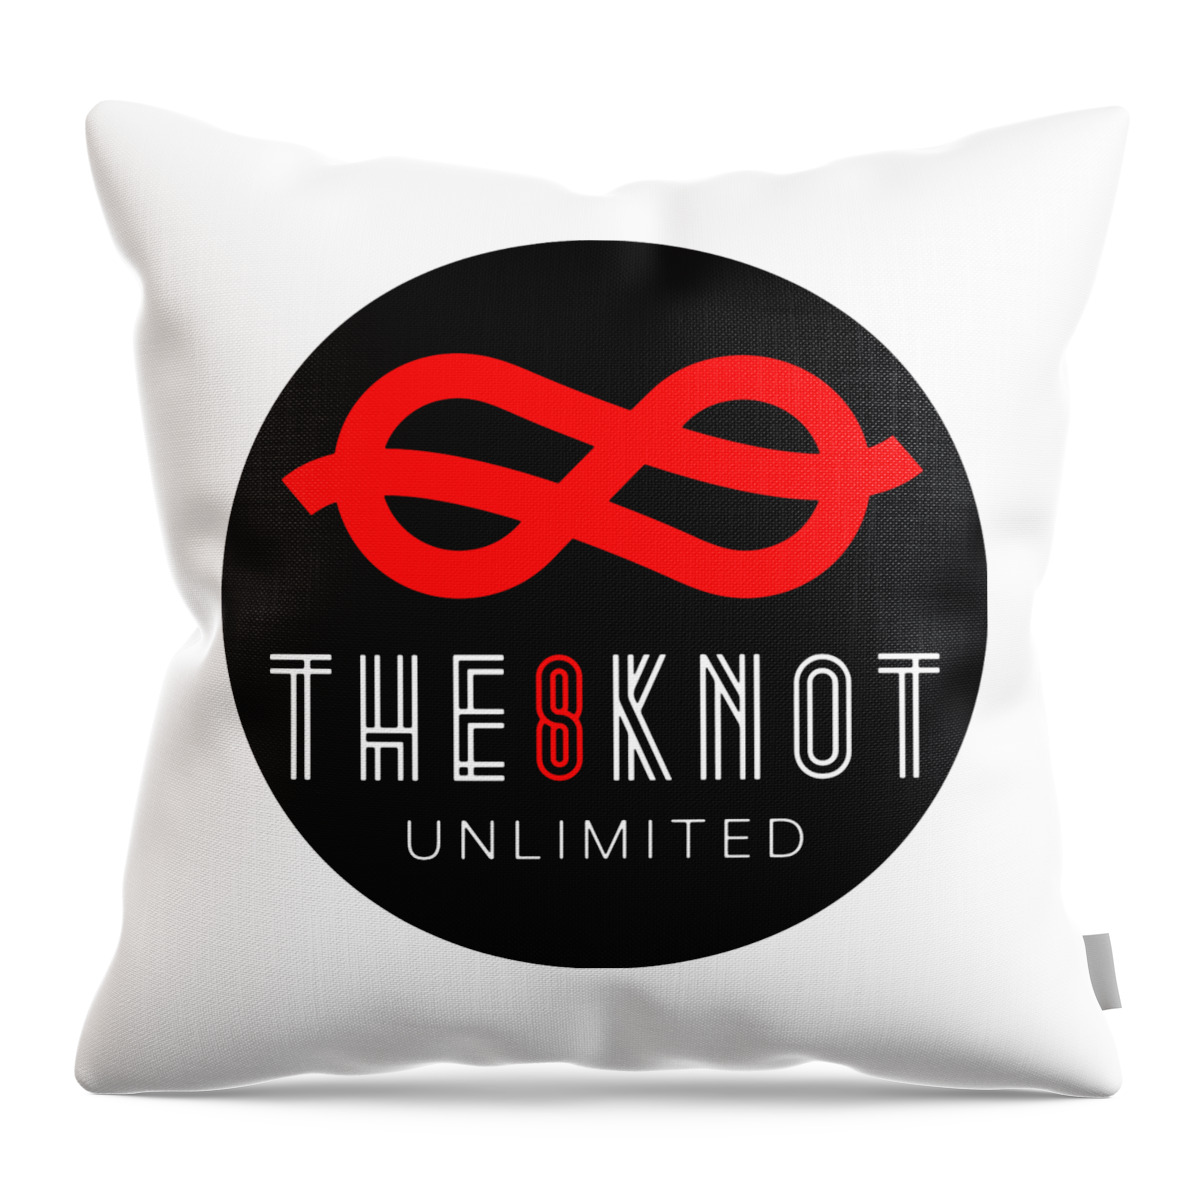 Knot Throw Pillow featuring the digital art Celtic Infinity Love Knot, Eight Knot Abstract Concept by Mounir Khalfouf